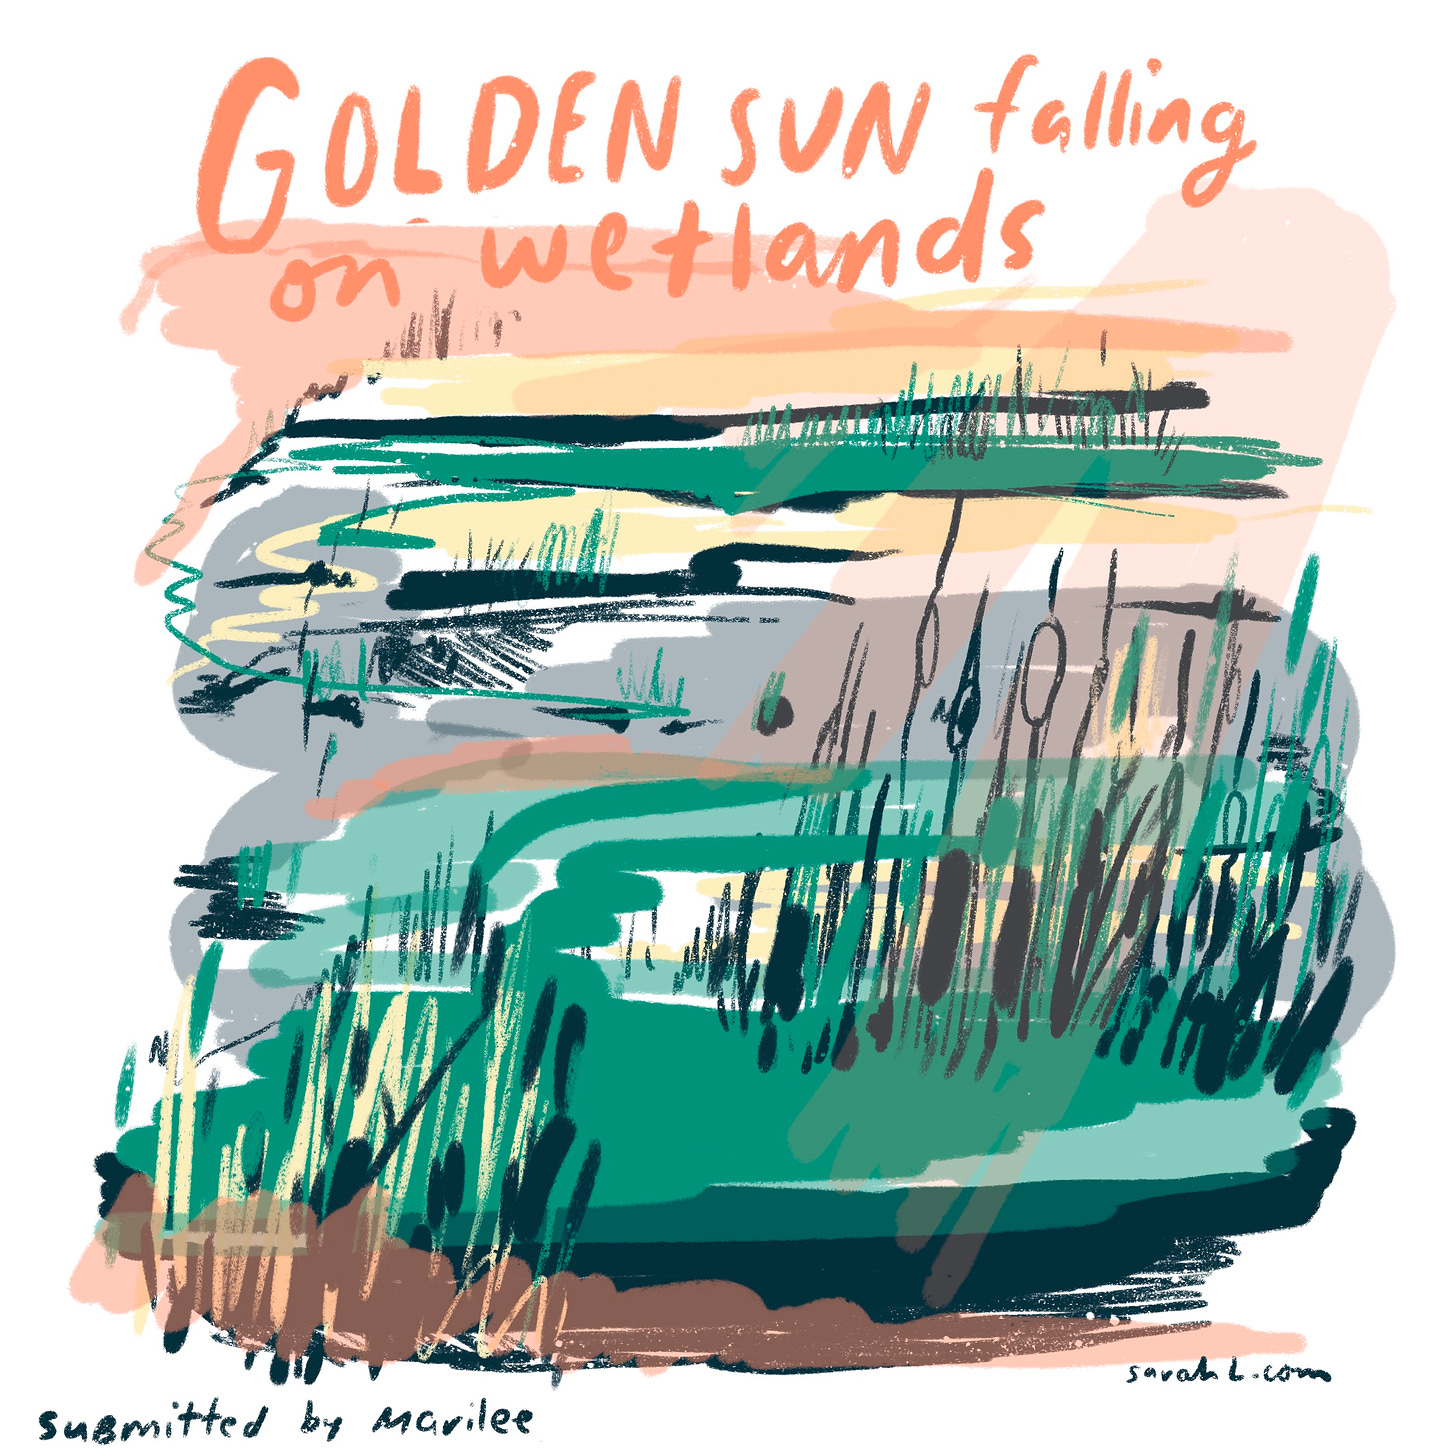 An illustrated image of wetlands, includes text at the top reading "Golden sun falling on wetlands." The sky is colored orange and yellow, and the wetlands are illustrated with green grasses, grey, white, and yellow water, and grey sketched cattails. The illustration was inspired by a memory submitted by Marilee. 